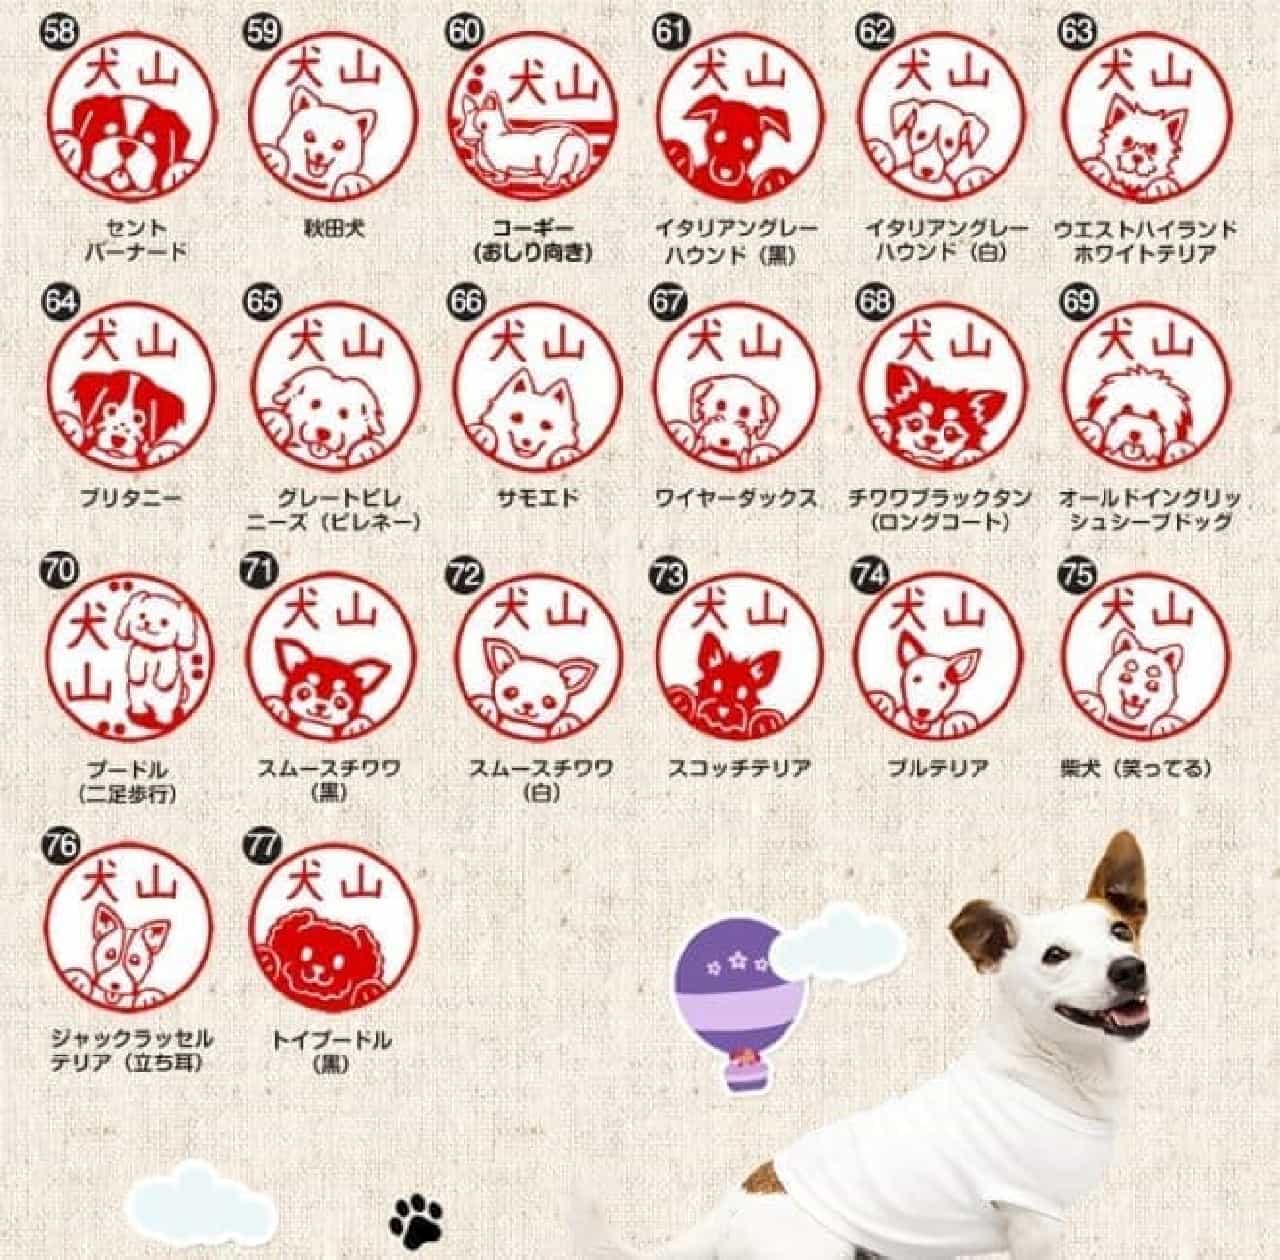 17 types of dogs added this time